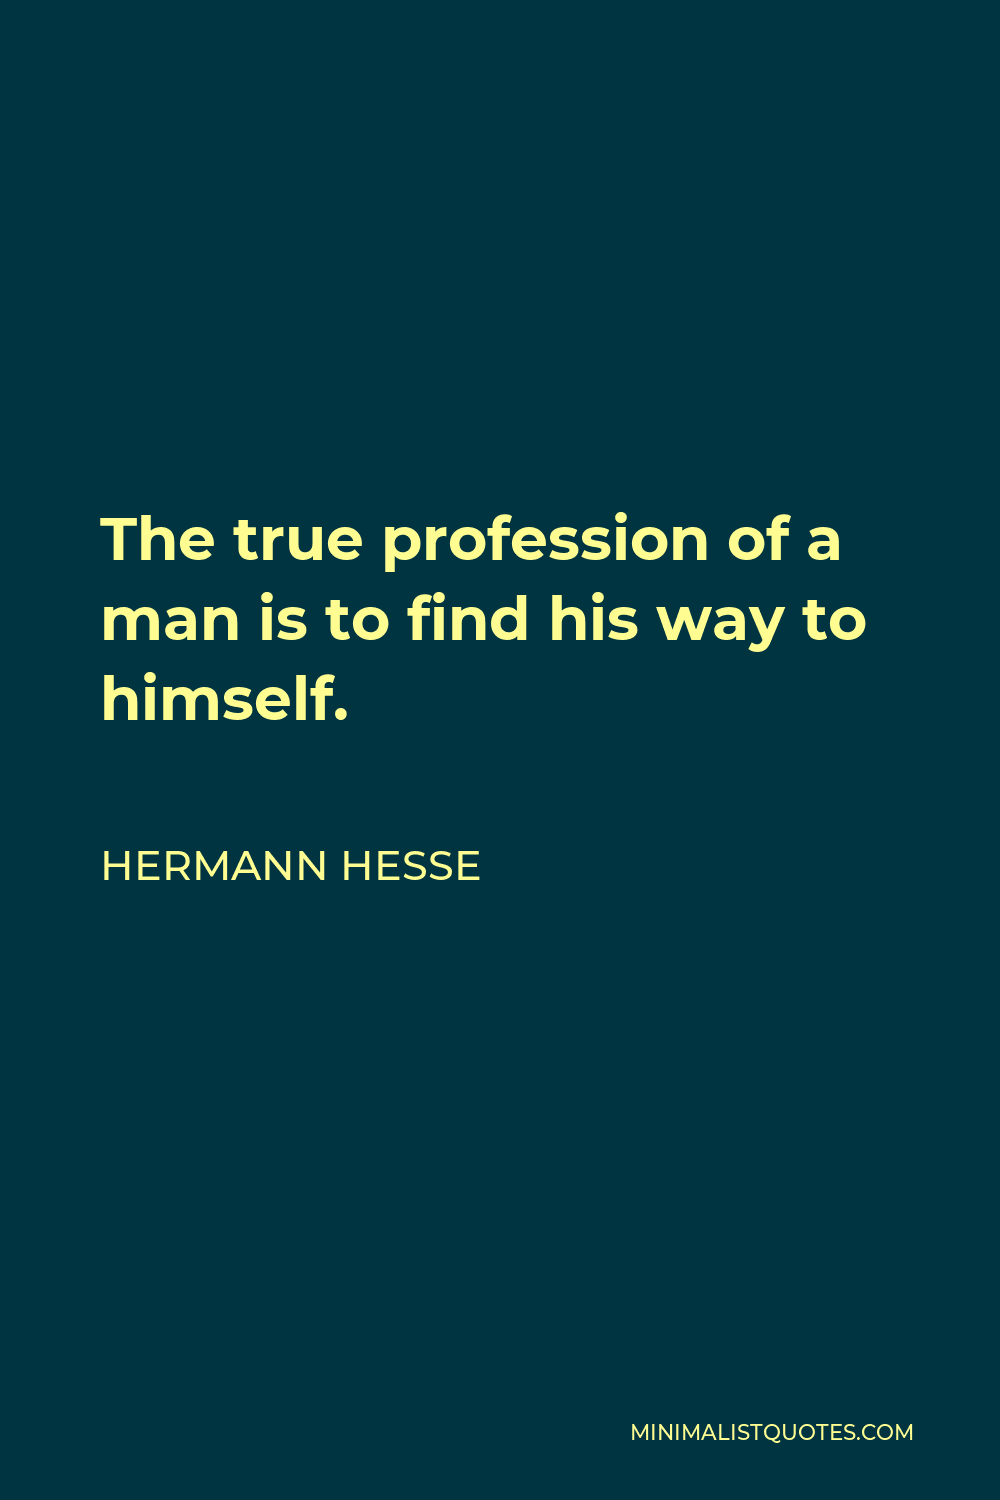 Hermann Hesse Quote - The true profession of a man is to find his way to himself.